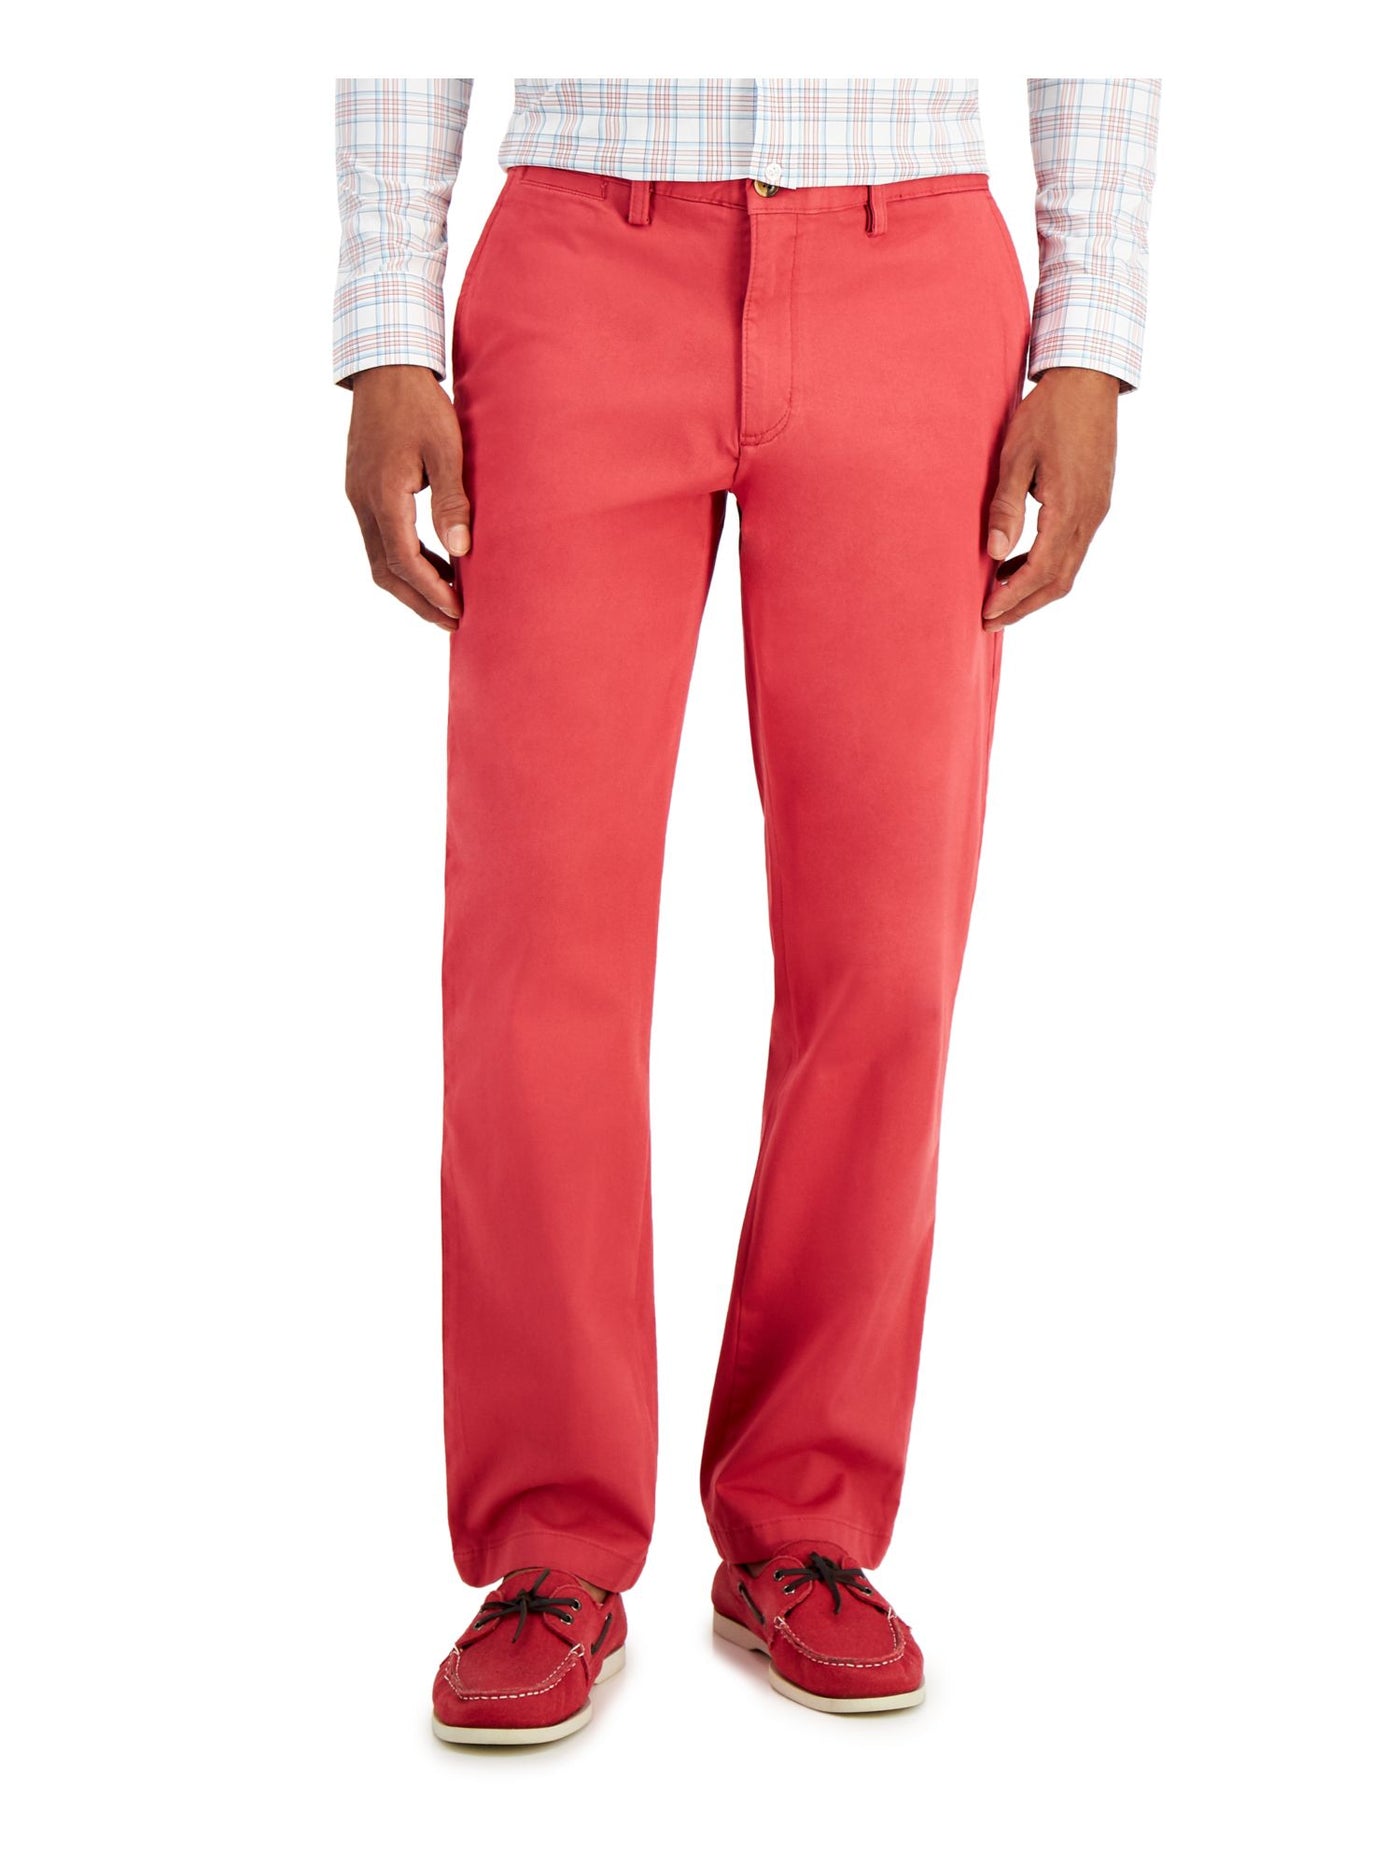 CLUBROOM Mens Red Classic Fit Stretch Chino Pants W34/ L30